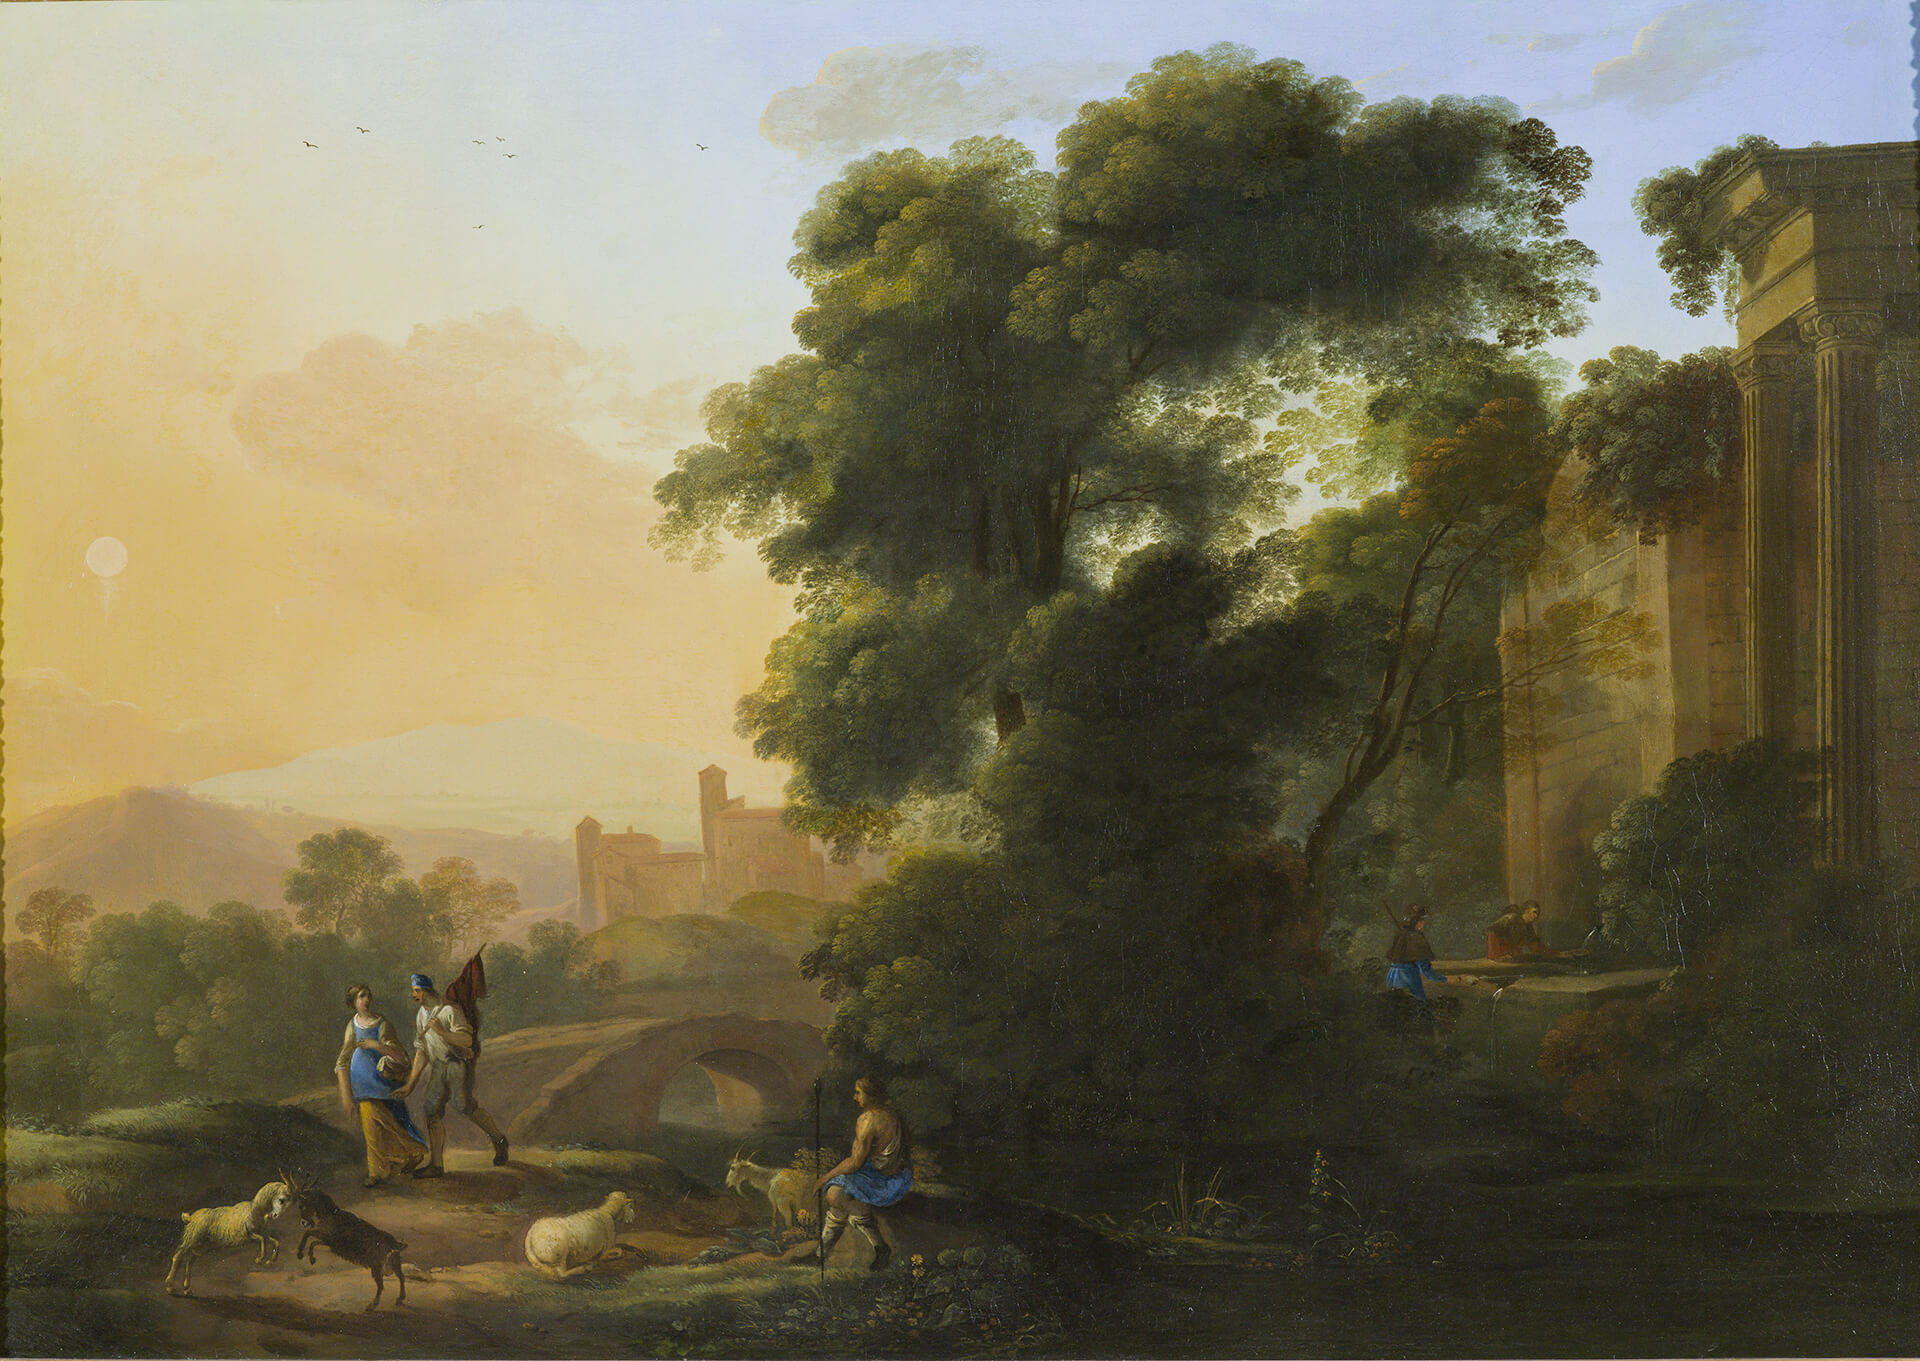 Landscape with Classical Ruins and Figures